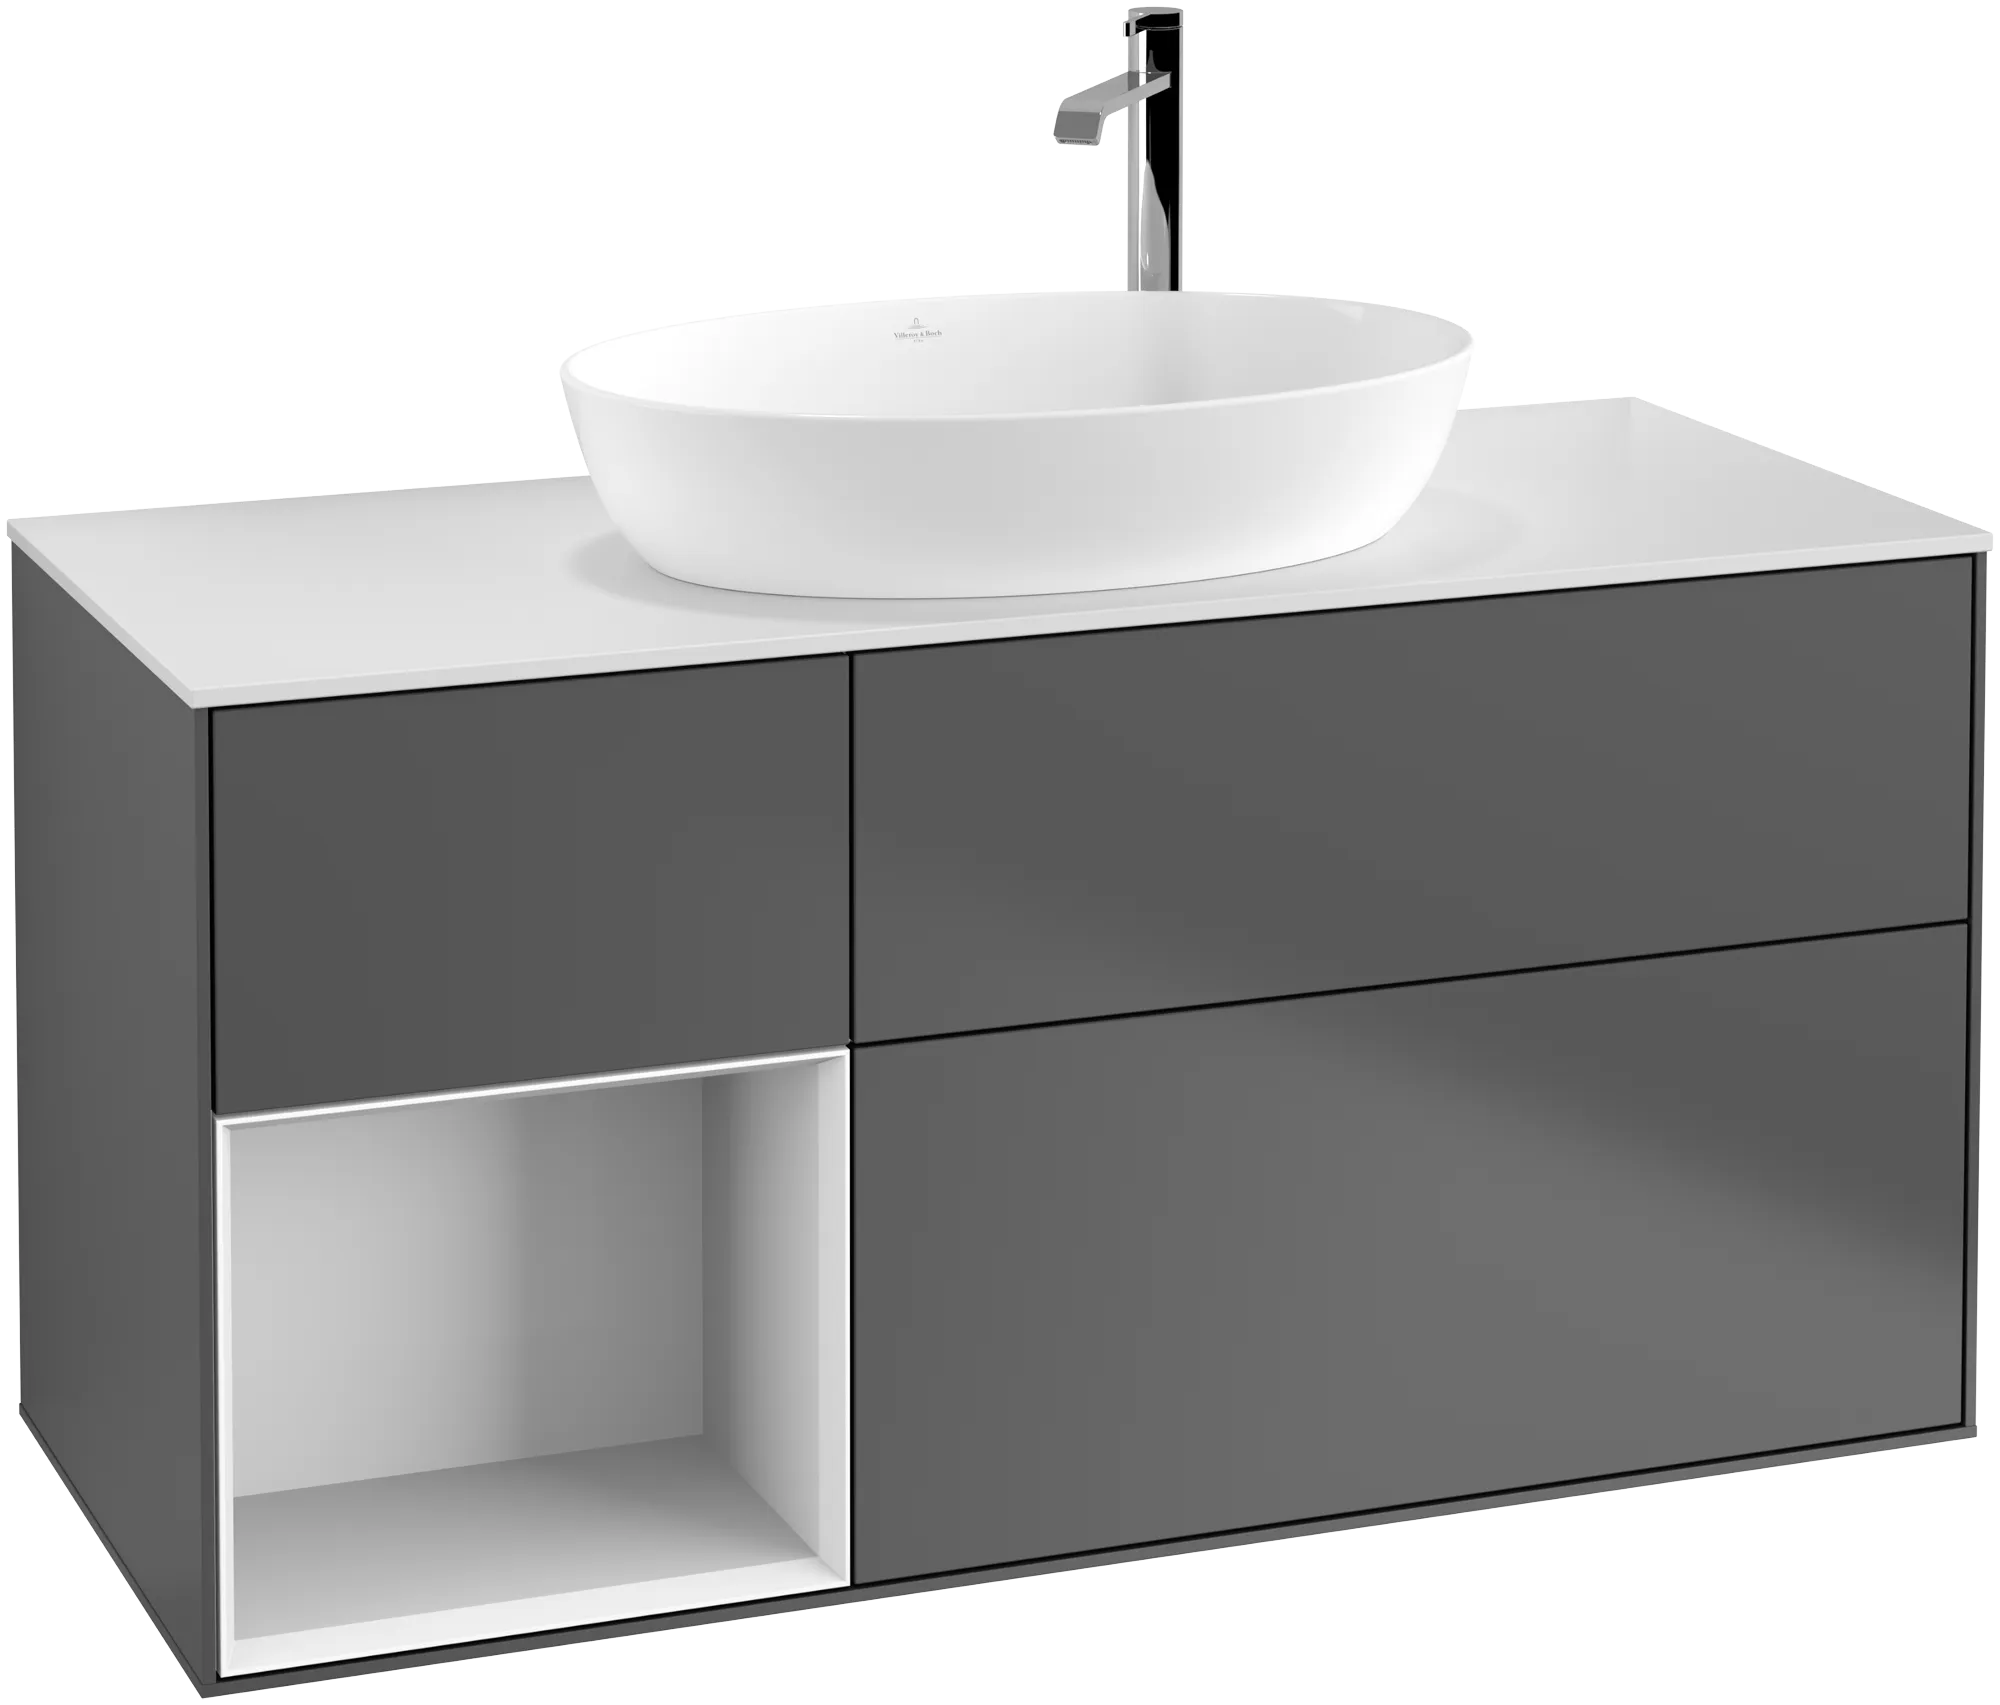 Obrázek VILLEROY BOCH Finion Vanity unit, with lighting, 3 pull-out compartments, 1200 x 603 x 501 mm, Anthracite Matt Lacquer / Glossy White Lacquer / Glass White Matt #G941GFGK